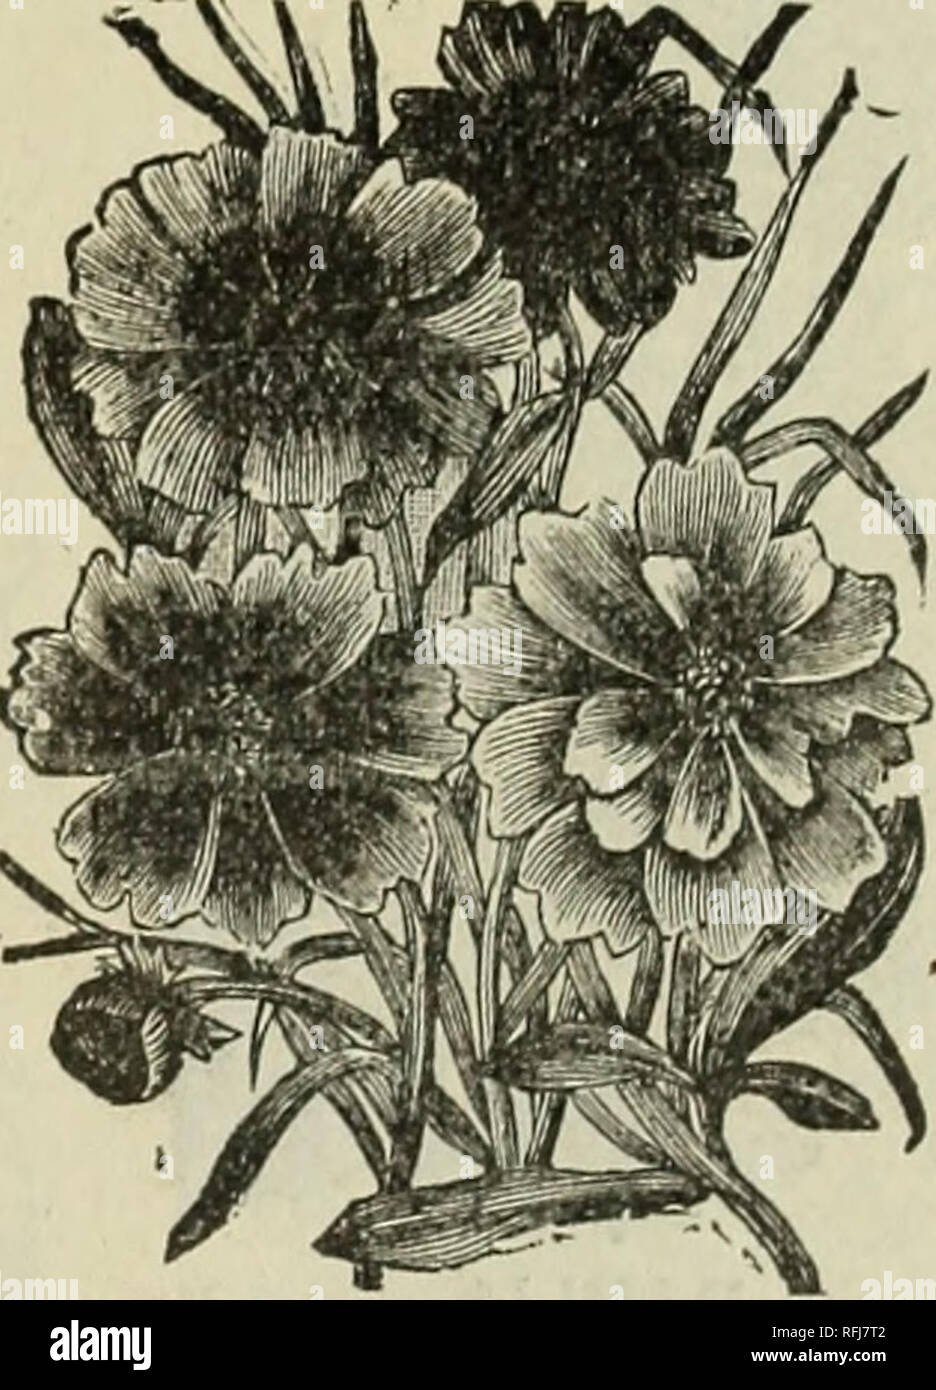 . Flowers 1900 : Crocker's flower seeds. Nursery stock Kansas Catalogs; Flowers Seeds Catalogs. CAMPANULA—Canterbury Bells. CAMPANULA. Canterbury Bells. The bell-shaped flowers of the Cam- panula, their varied and beautitul colors, combined with the strong and stately growth of the plant, have made it deserv- edly popular. Our seeds are saved from the best double flowered specimens, and will produce a fair percentage of double blooms. The Campanula blossoms are very ornamental when cut and used in bouquets with other flowers. Germinates in from 10 to 12 davs. Perennial. 8INGLE MIXED. Pkt., 200 Stock Photo